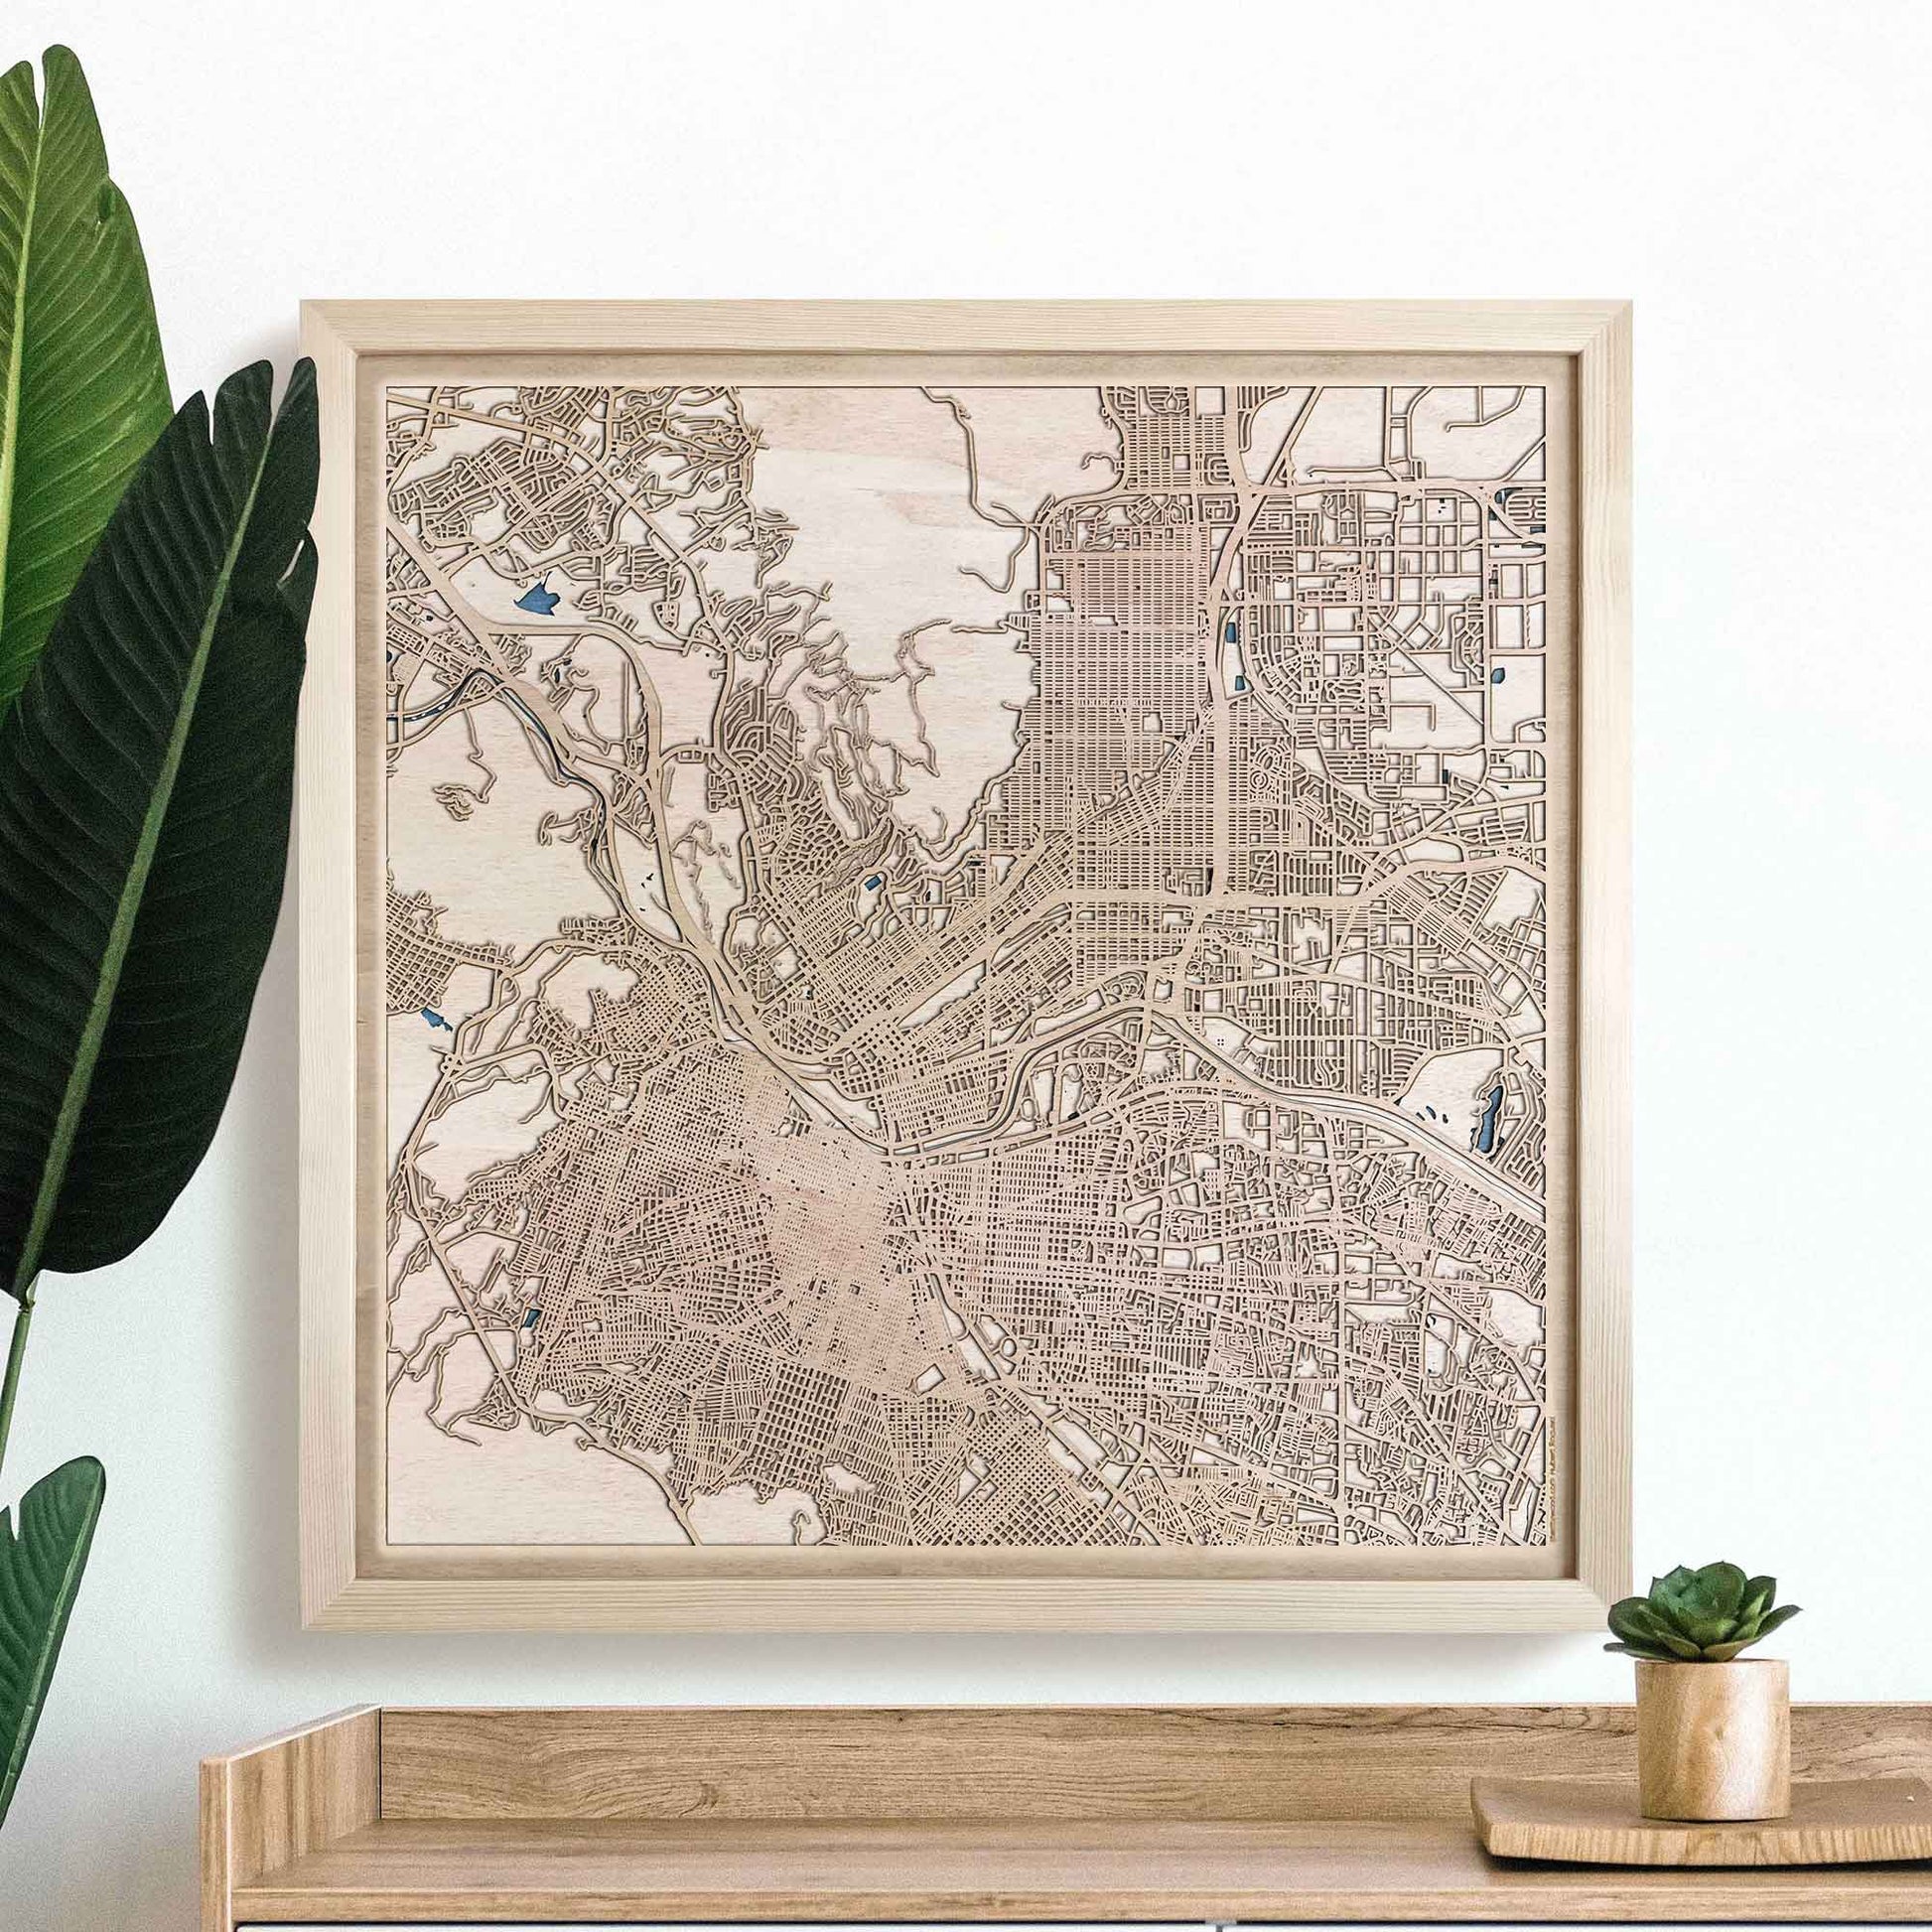 El Paso Wooden Map by CityWood - Custom Wood Map Art - Unique Laser Cut Engraved - Anniversary Gift